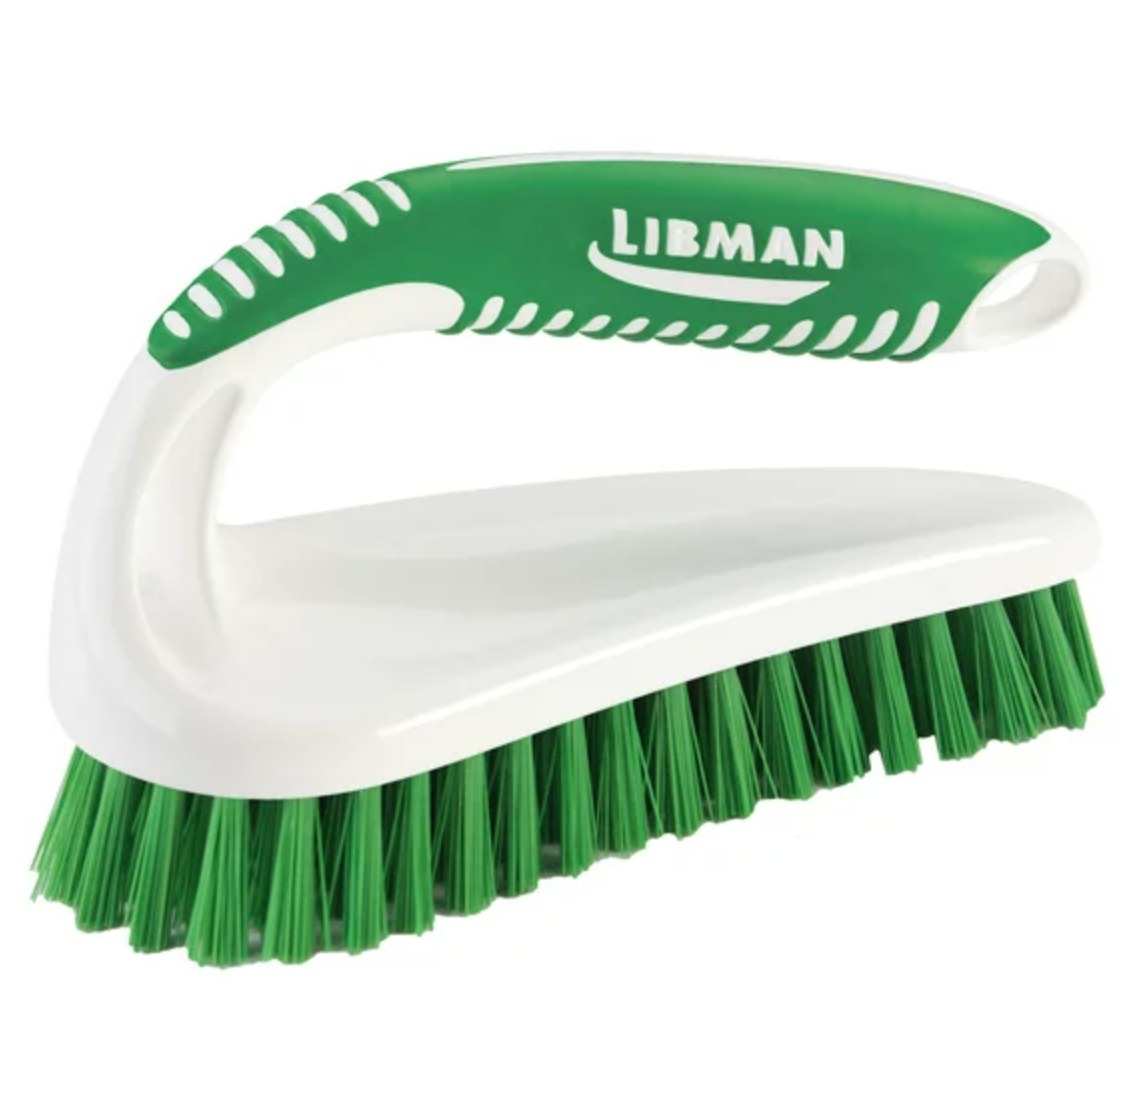 the white and green scrub brush with a curved handle